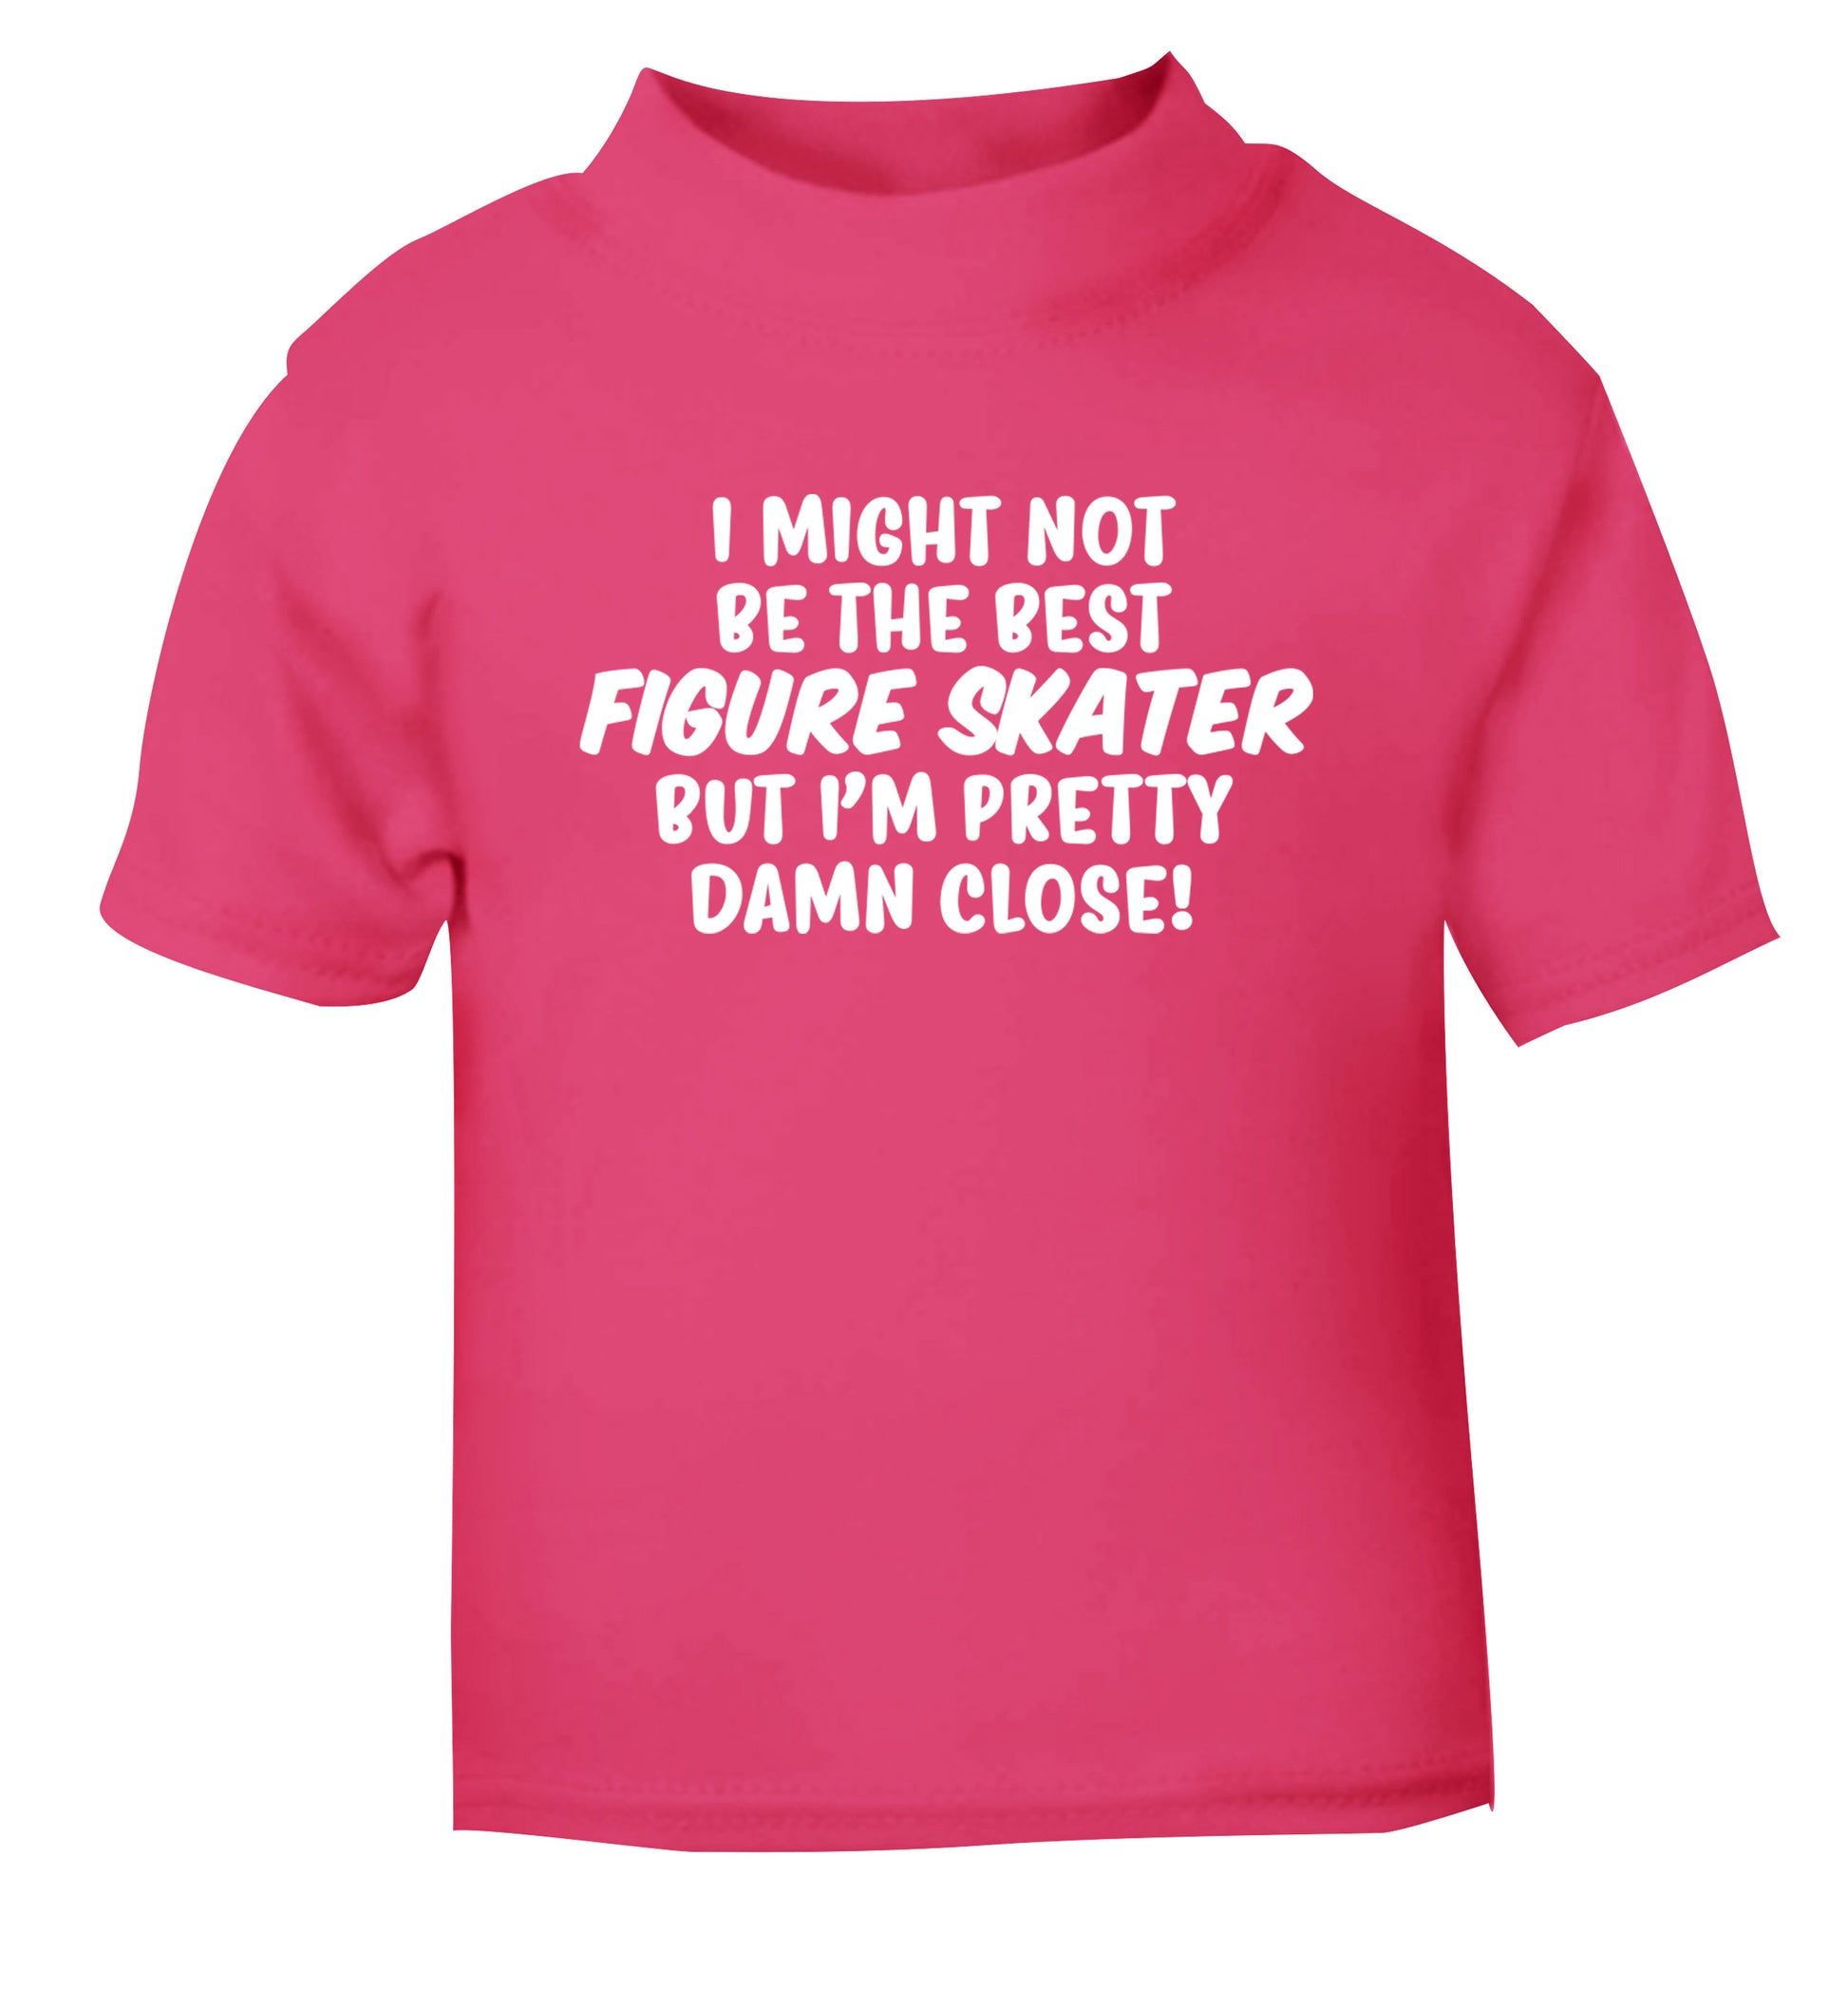 I might not be the best figure skater but I'm pretty damn close! pink Baby Toddler Tshirt 2 Years